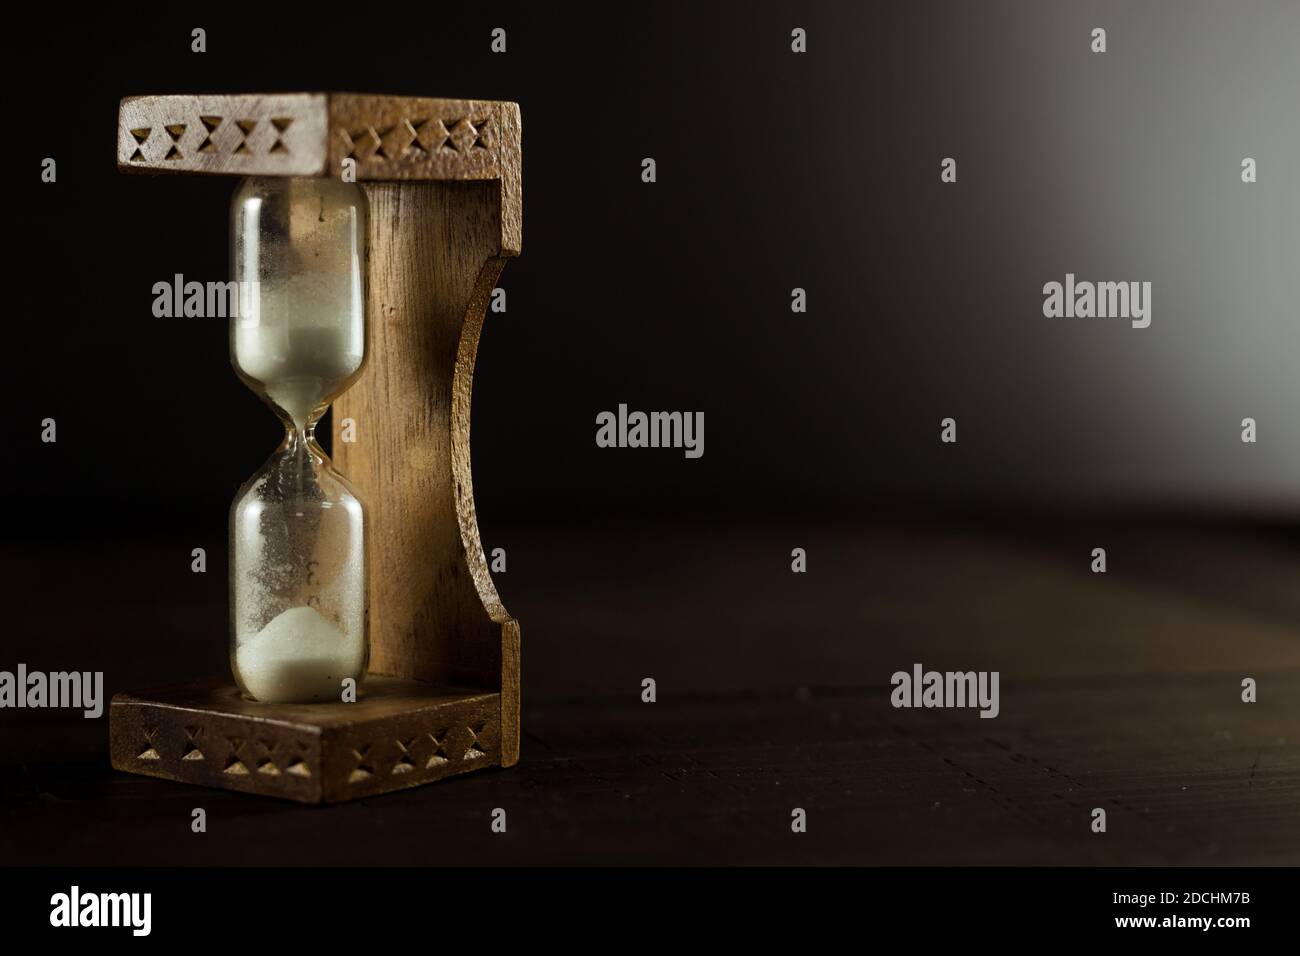 An old vintage hourglass sandglass with white sand on the wooden table. Black background, close up, business deadline concept. Stock Photo